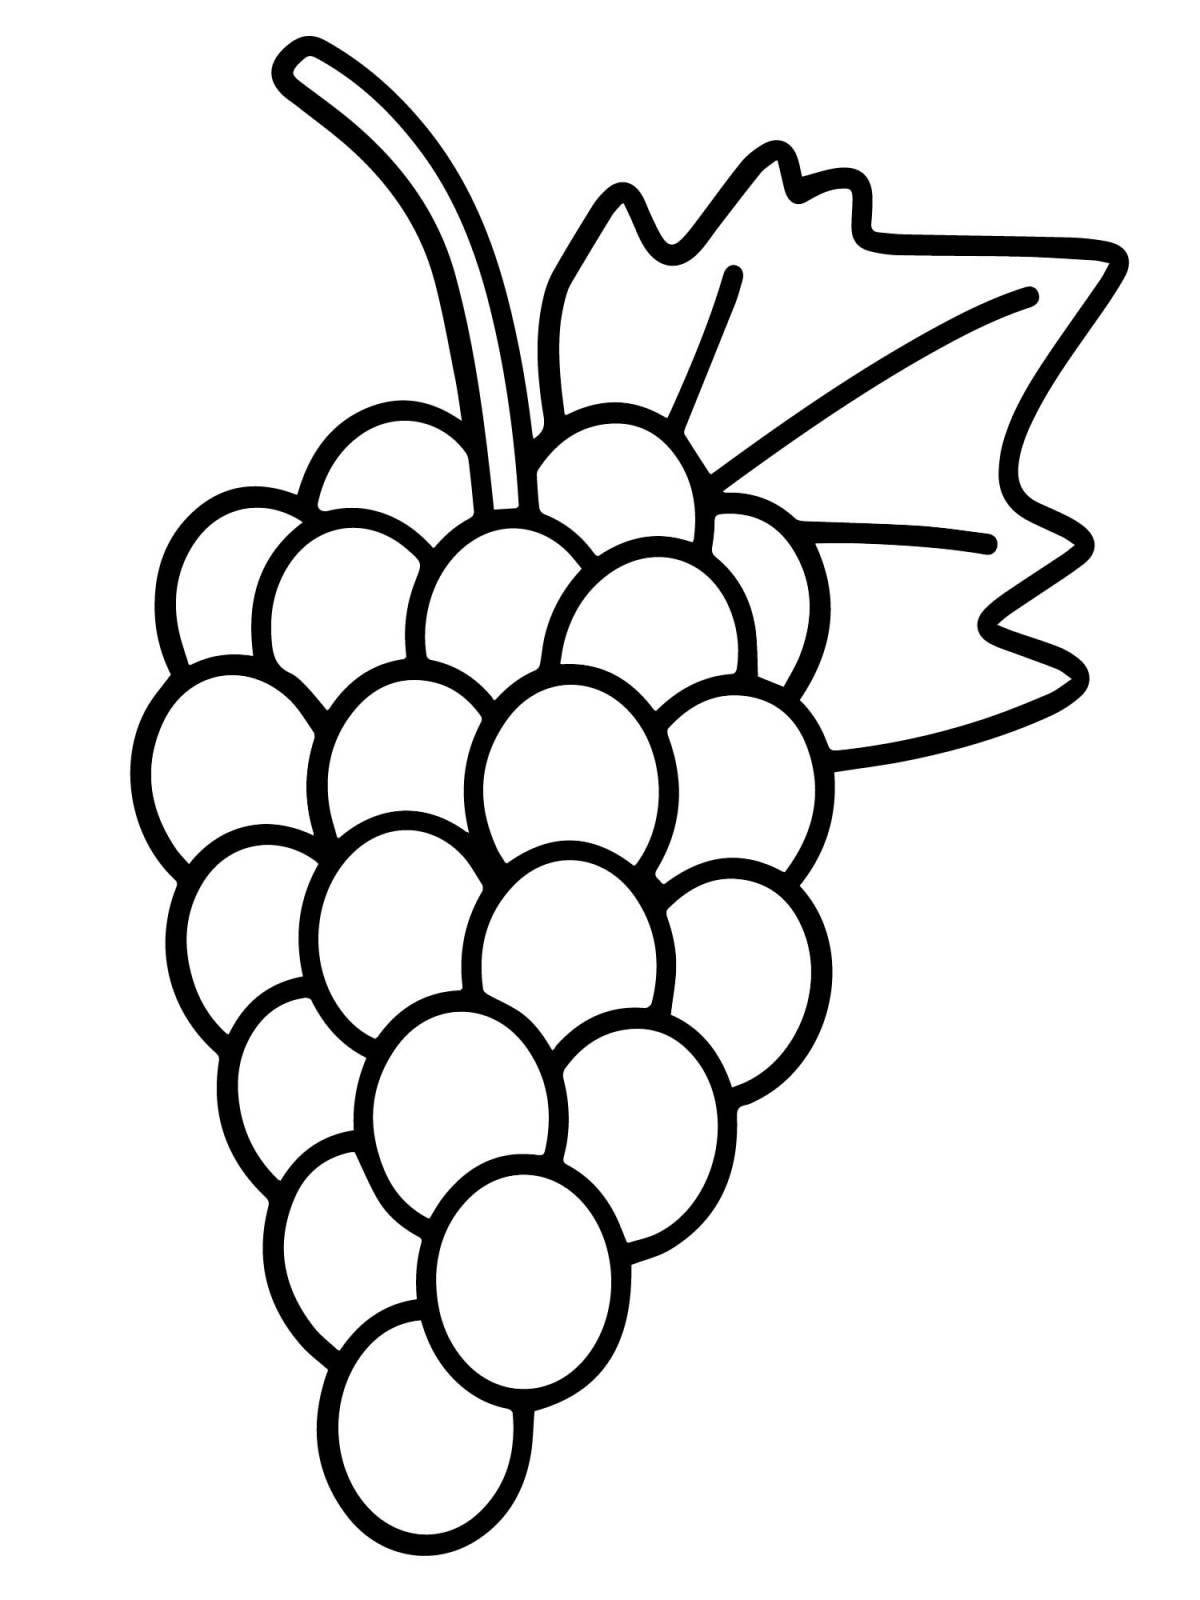 Colorful grape coloring page for 5-6 year olds